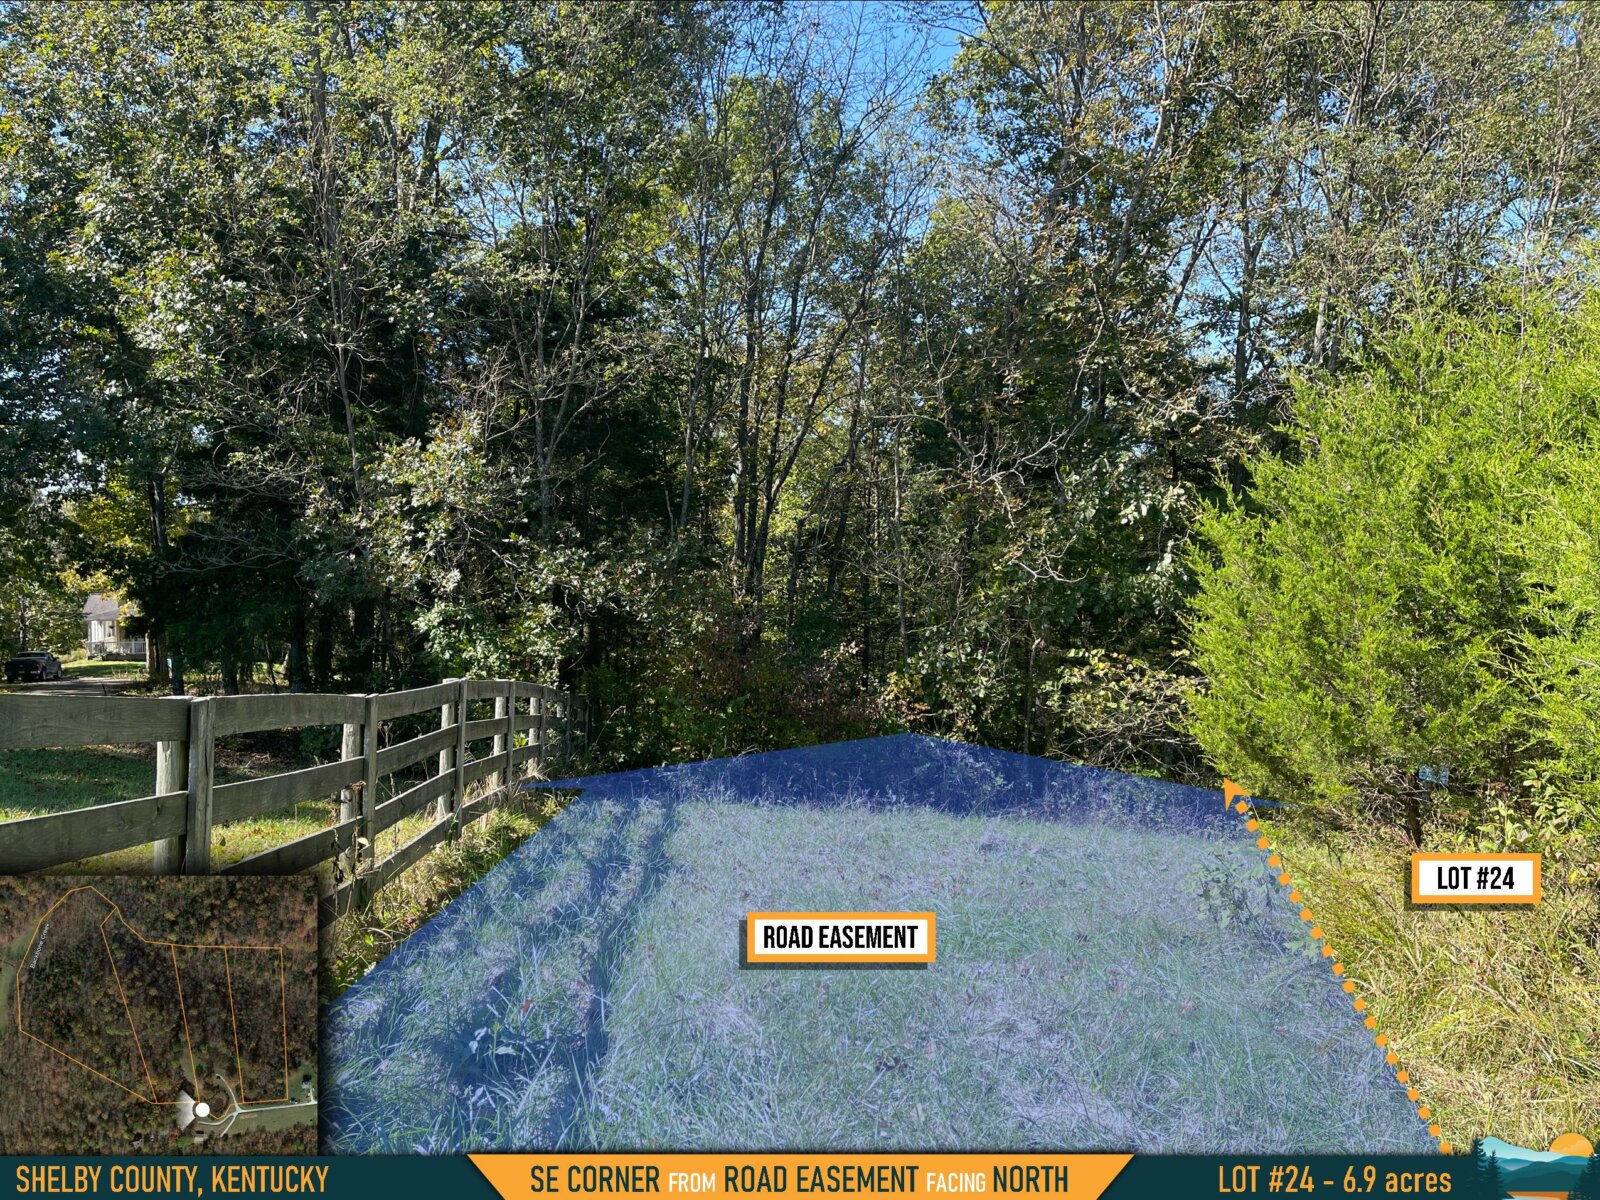 SHELBY COUNTY, KY | 6.9 acres | The “Renaissance” Lot | Secluded Lot Overlooking Valley